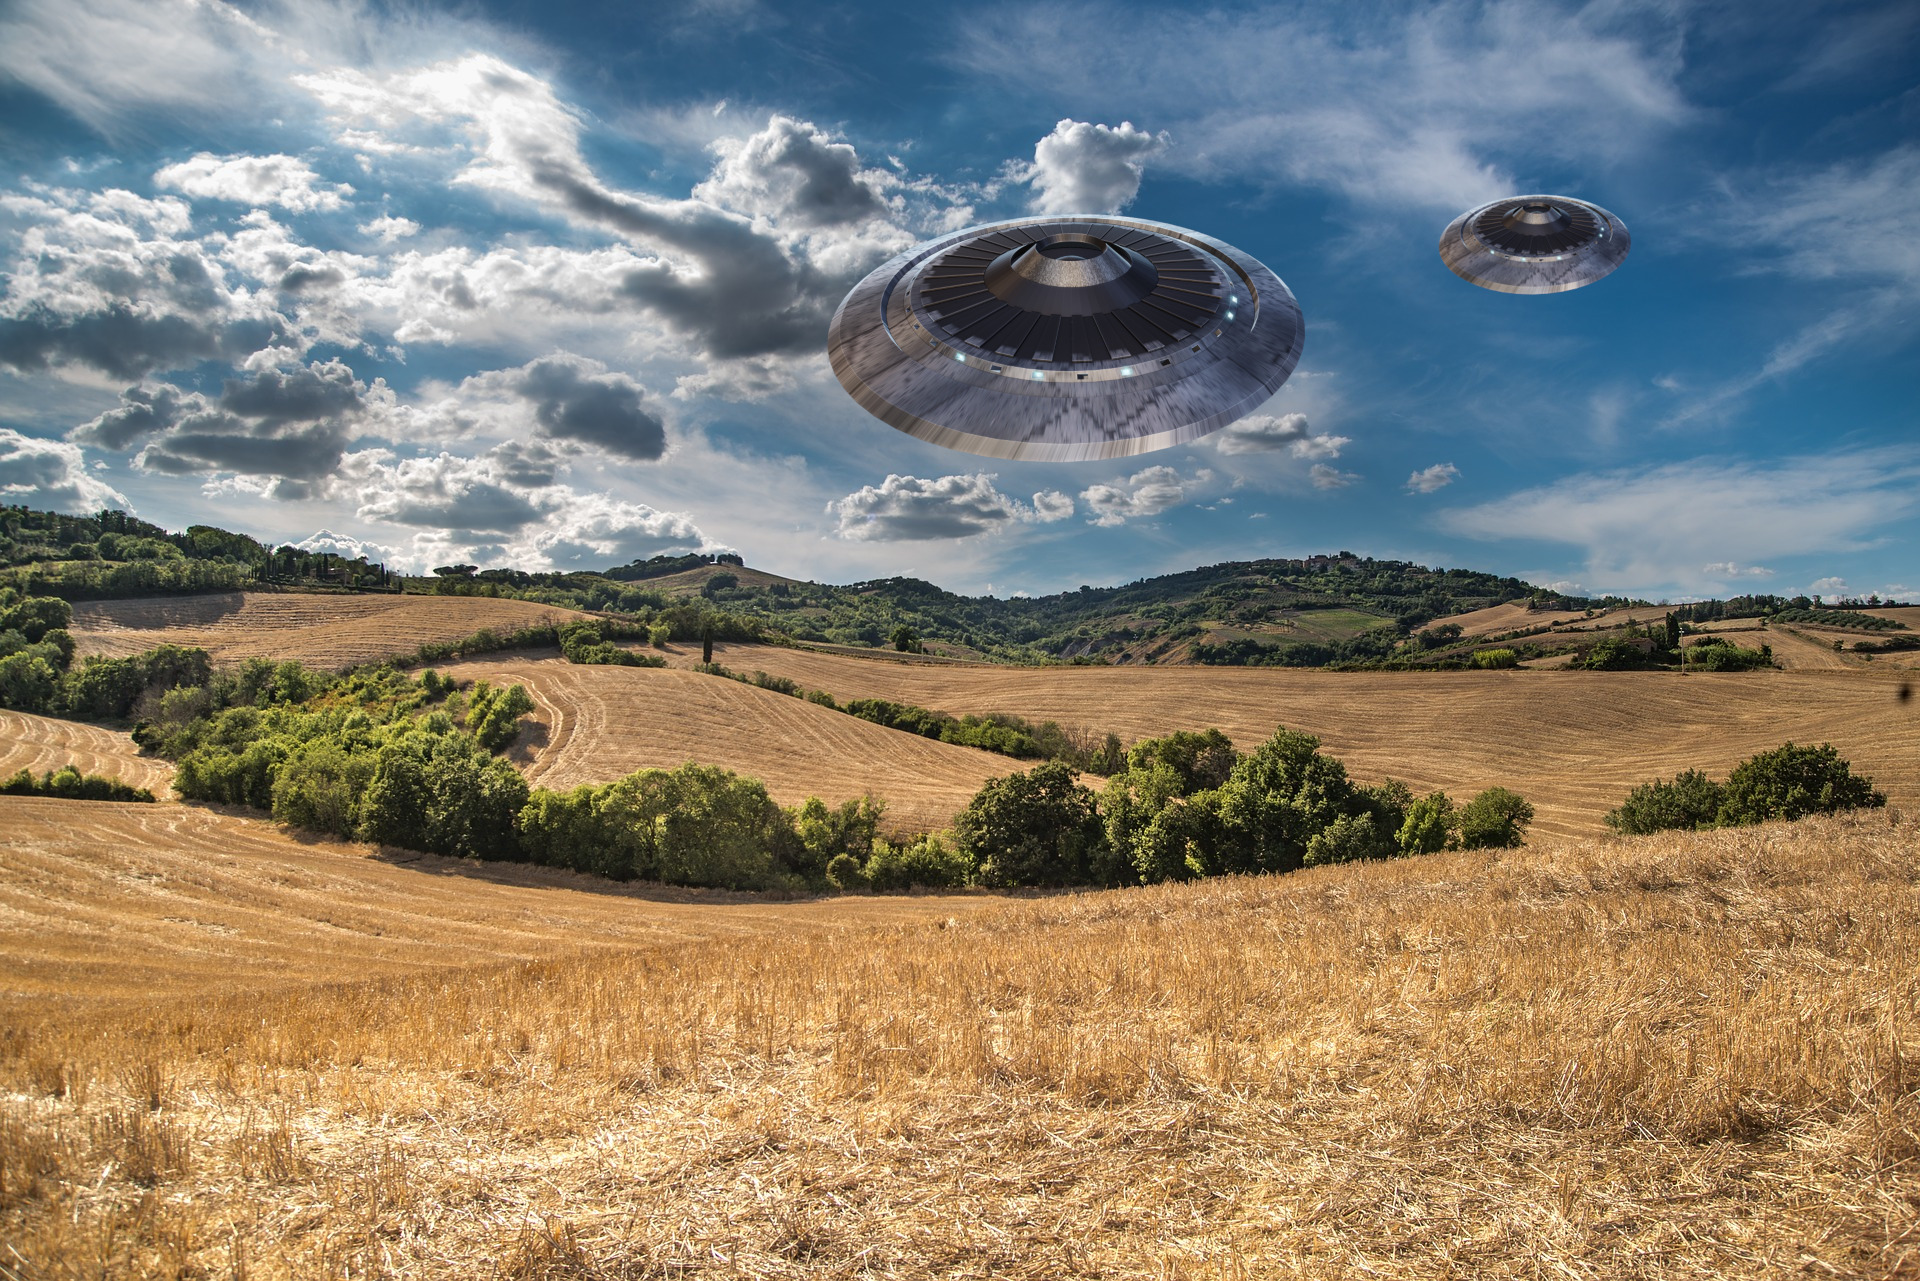 A depiction of a pair of UFOs